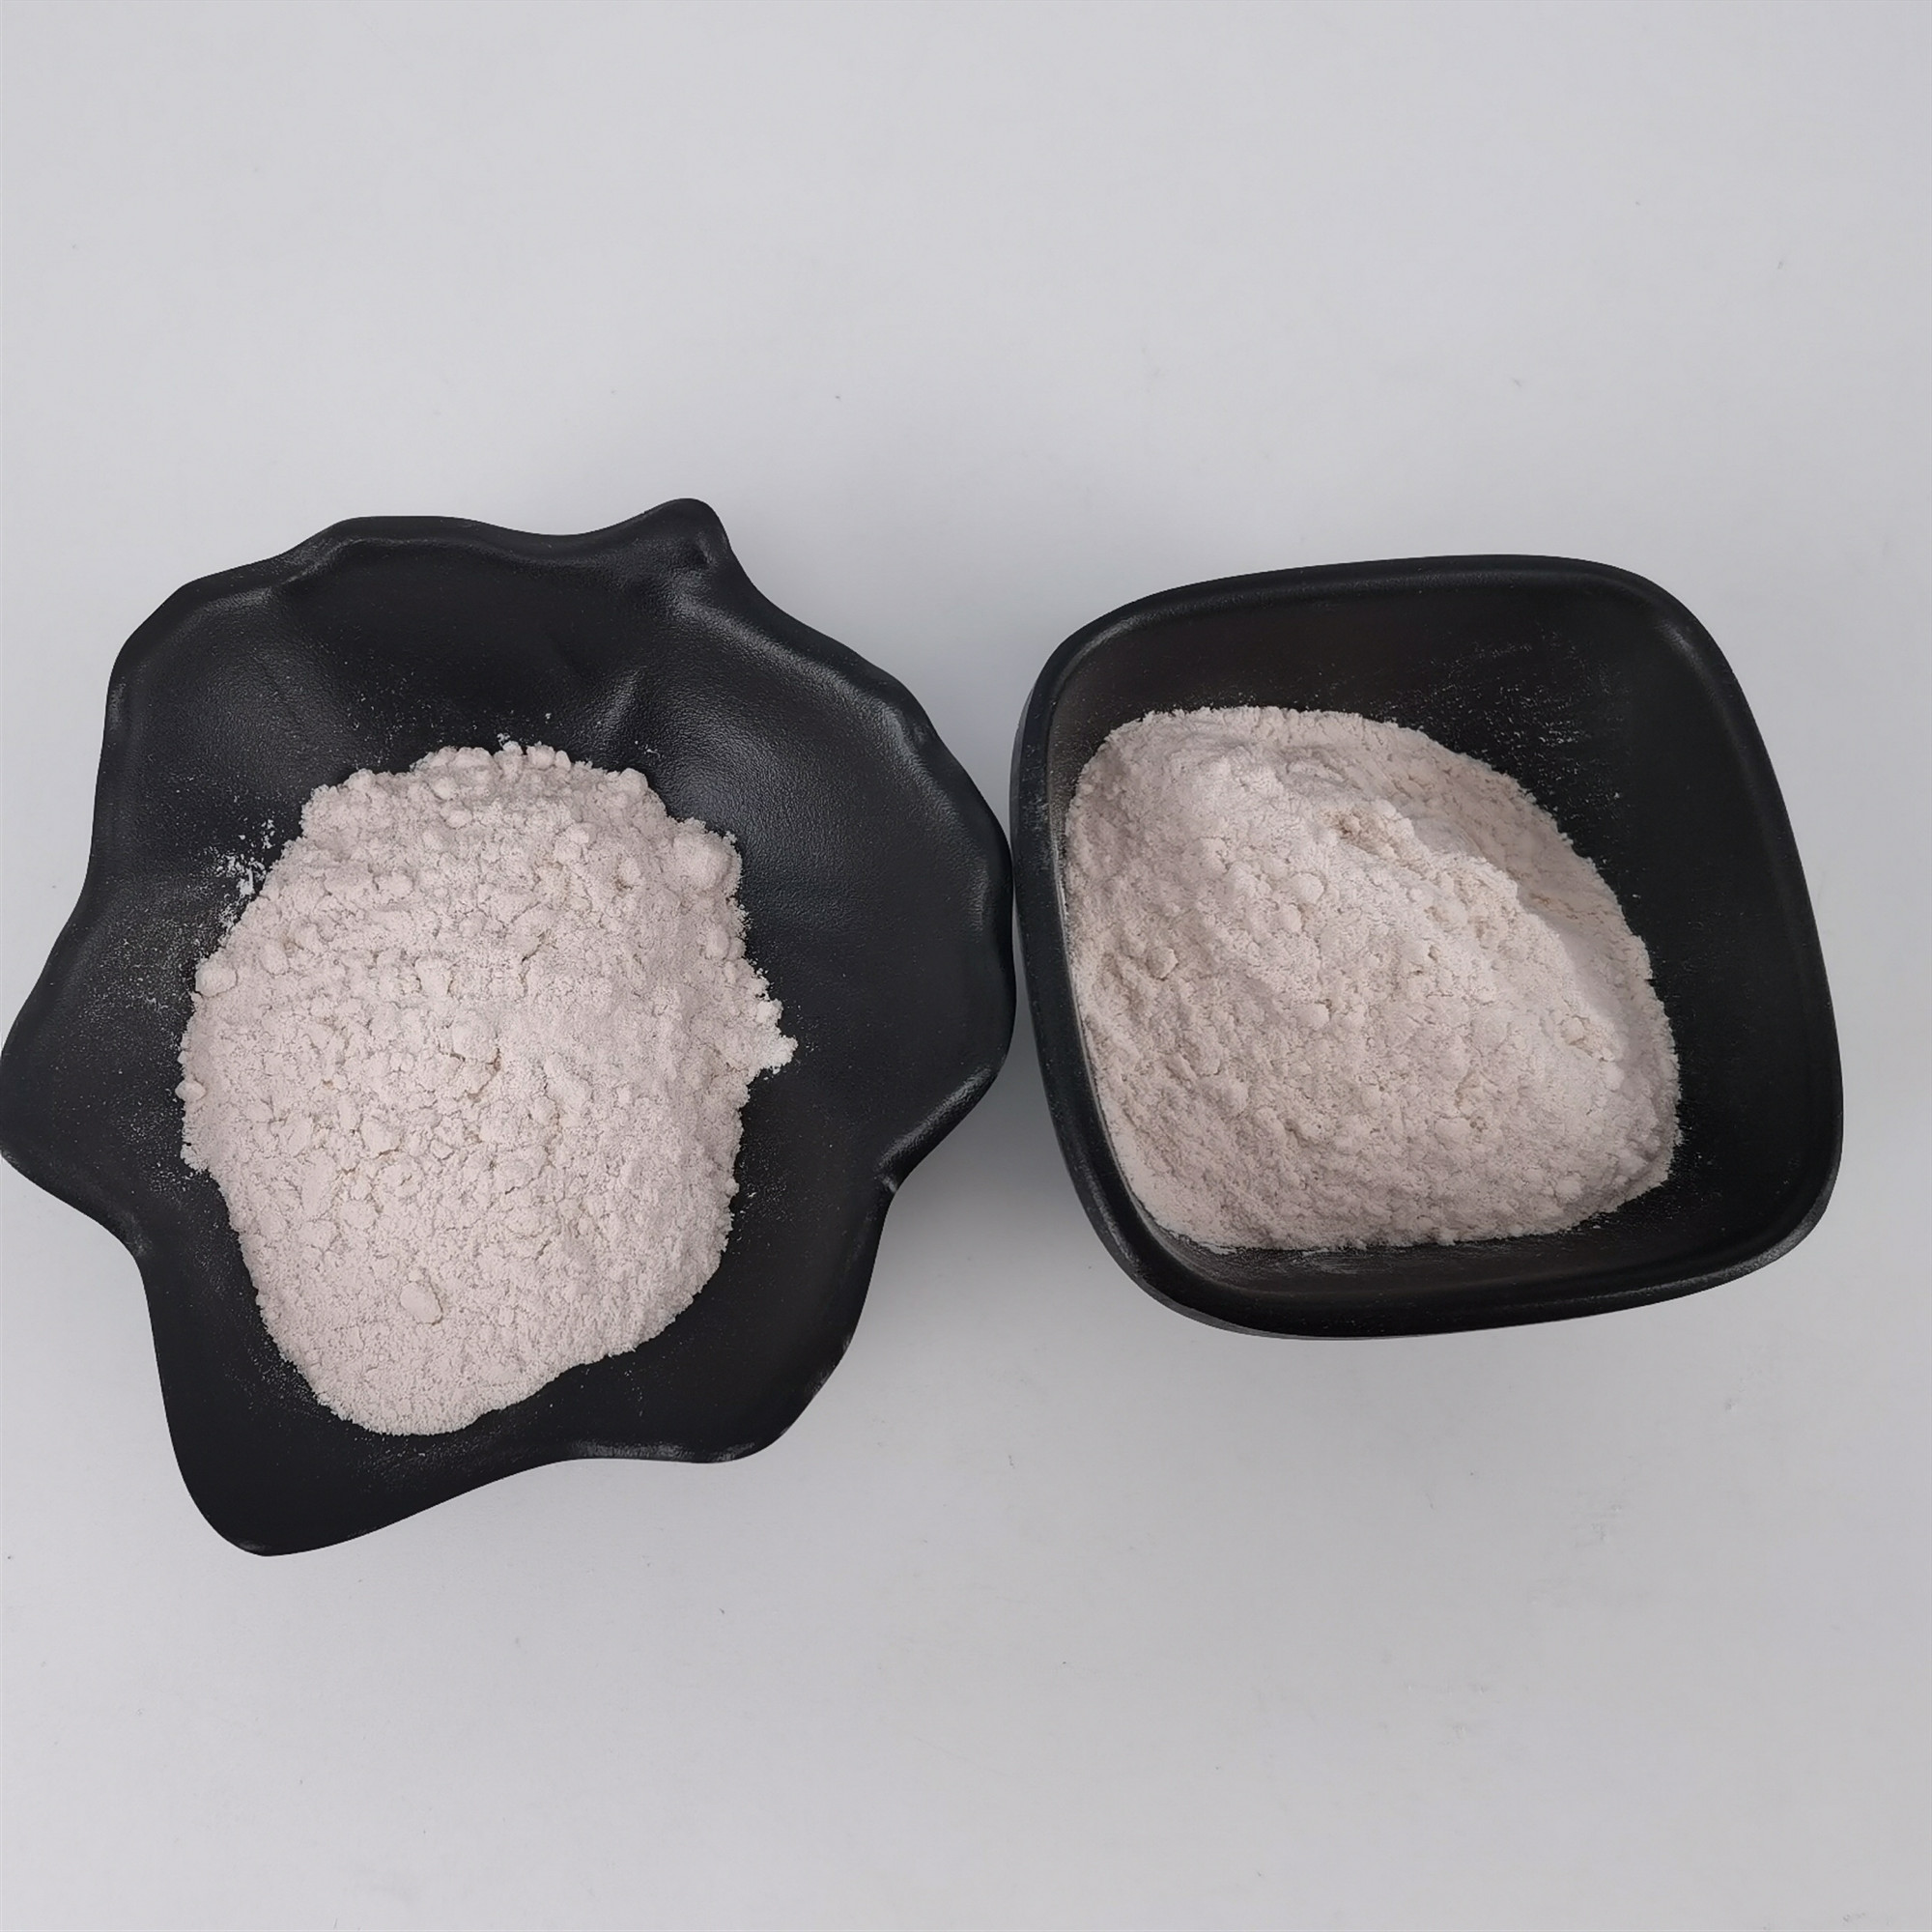  Alleviate Hangover Protect Liver SOD Powder Manufactures